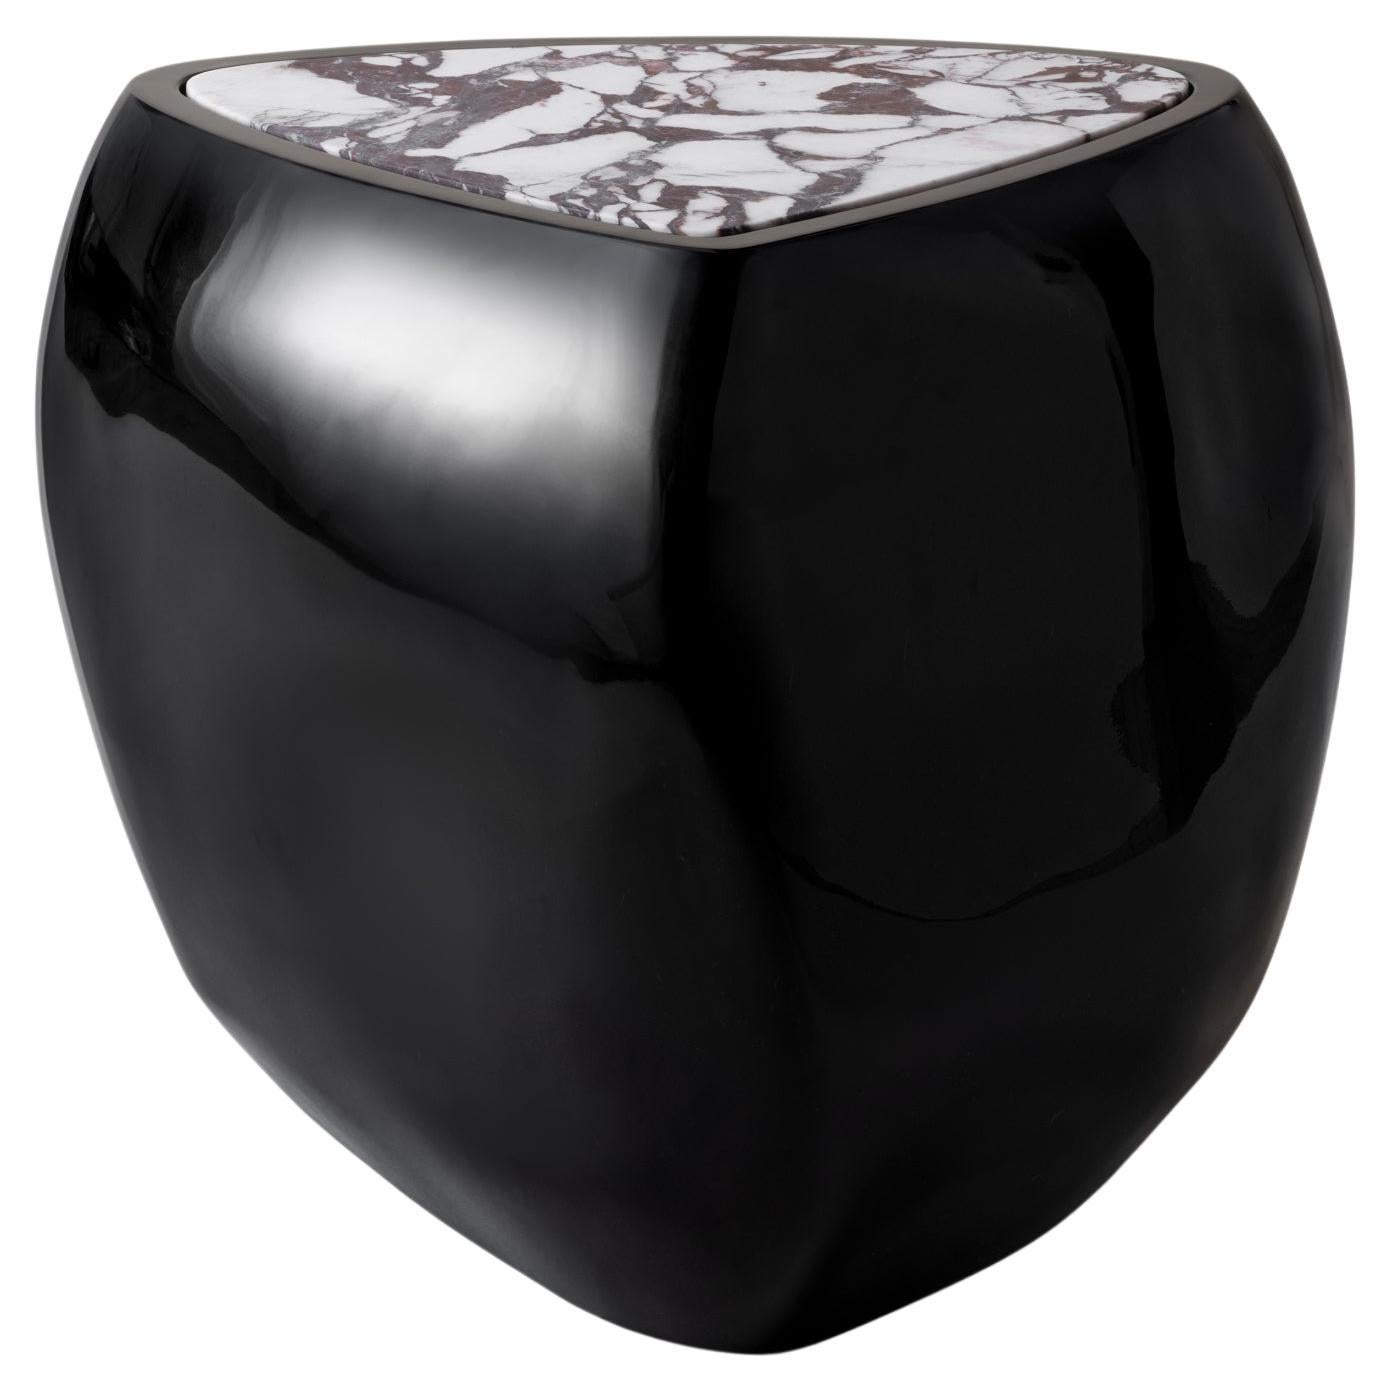 River Side Table in Black with Calacatta Viola Marble